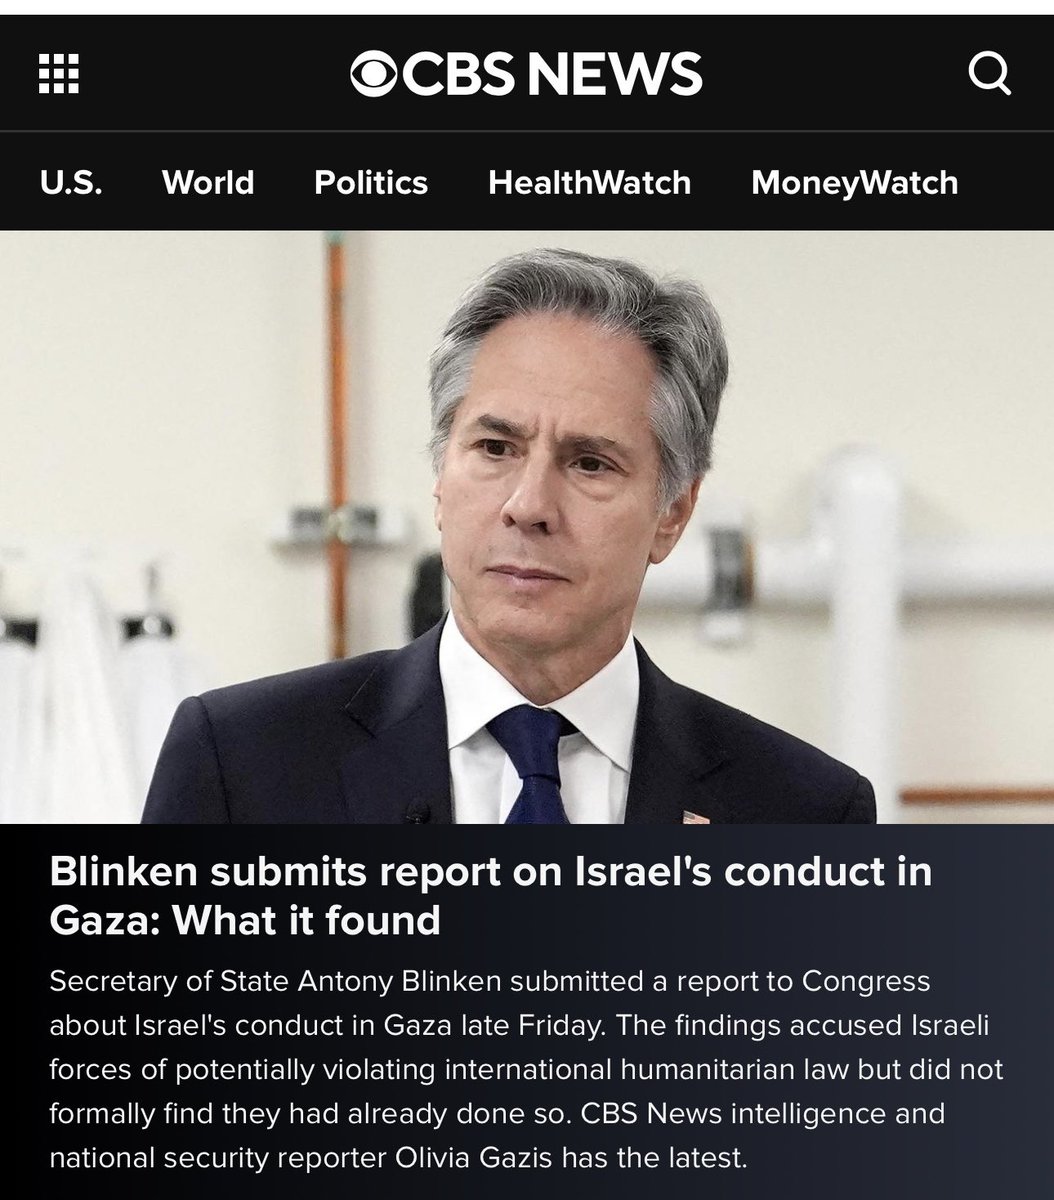 Now, let’s do a report on Hamas. I’ll start: - 1,200 Israelis slaughtered in a terror attack - Women raped, sexually mutilated and tortured - 252 hostages including babies, women, and the elderly - Americans still imprisoned in Gaza by terrorists Oh, but none of that matters…